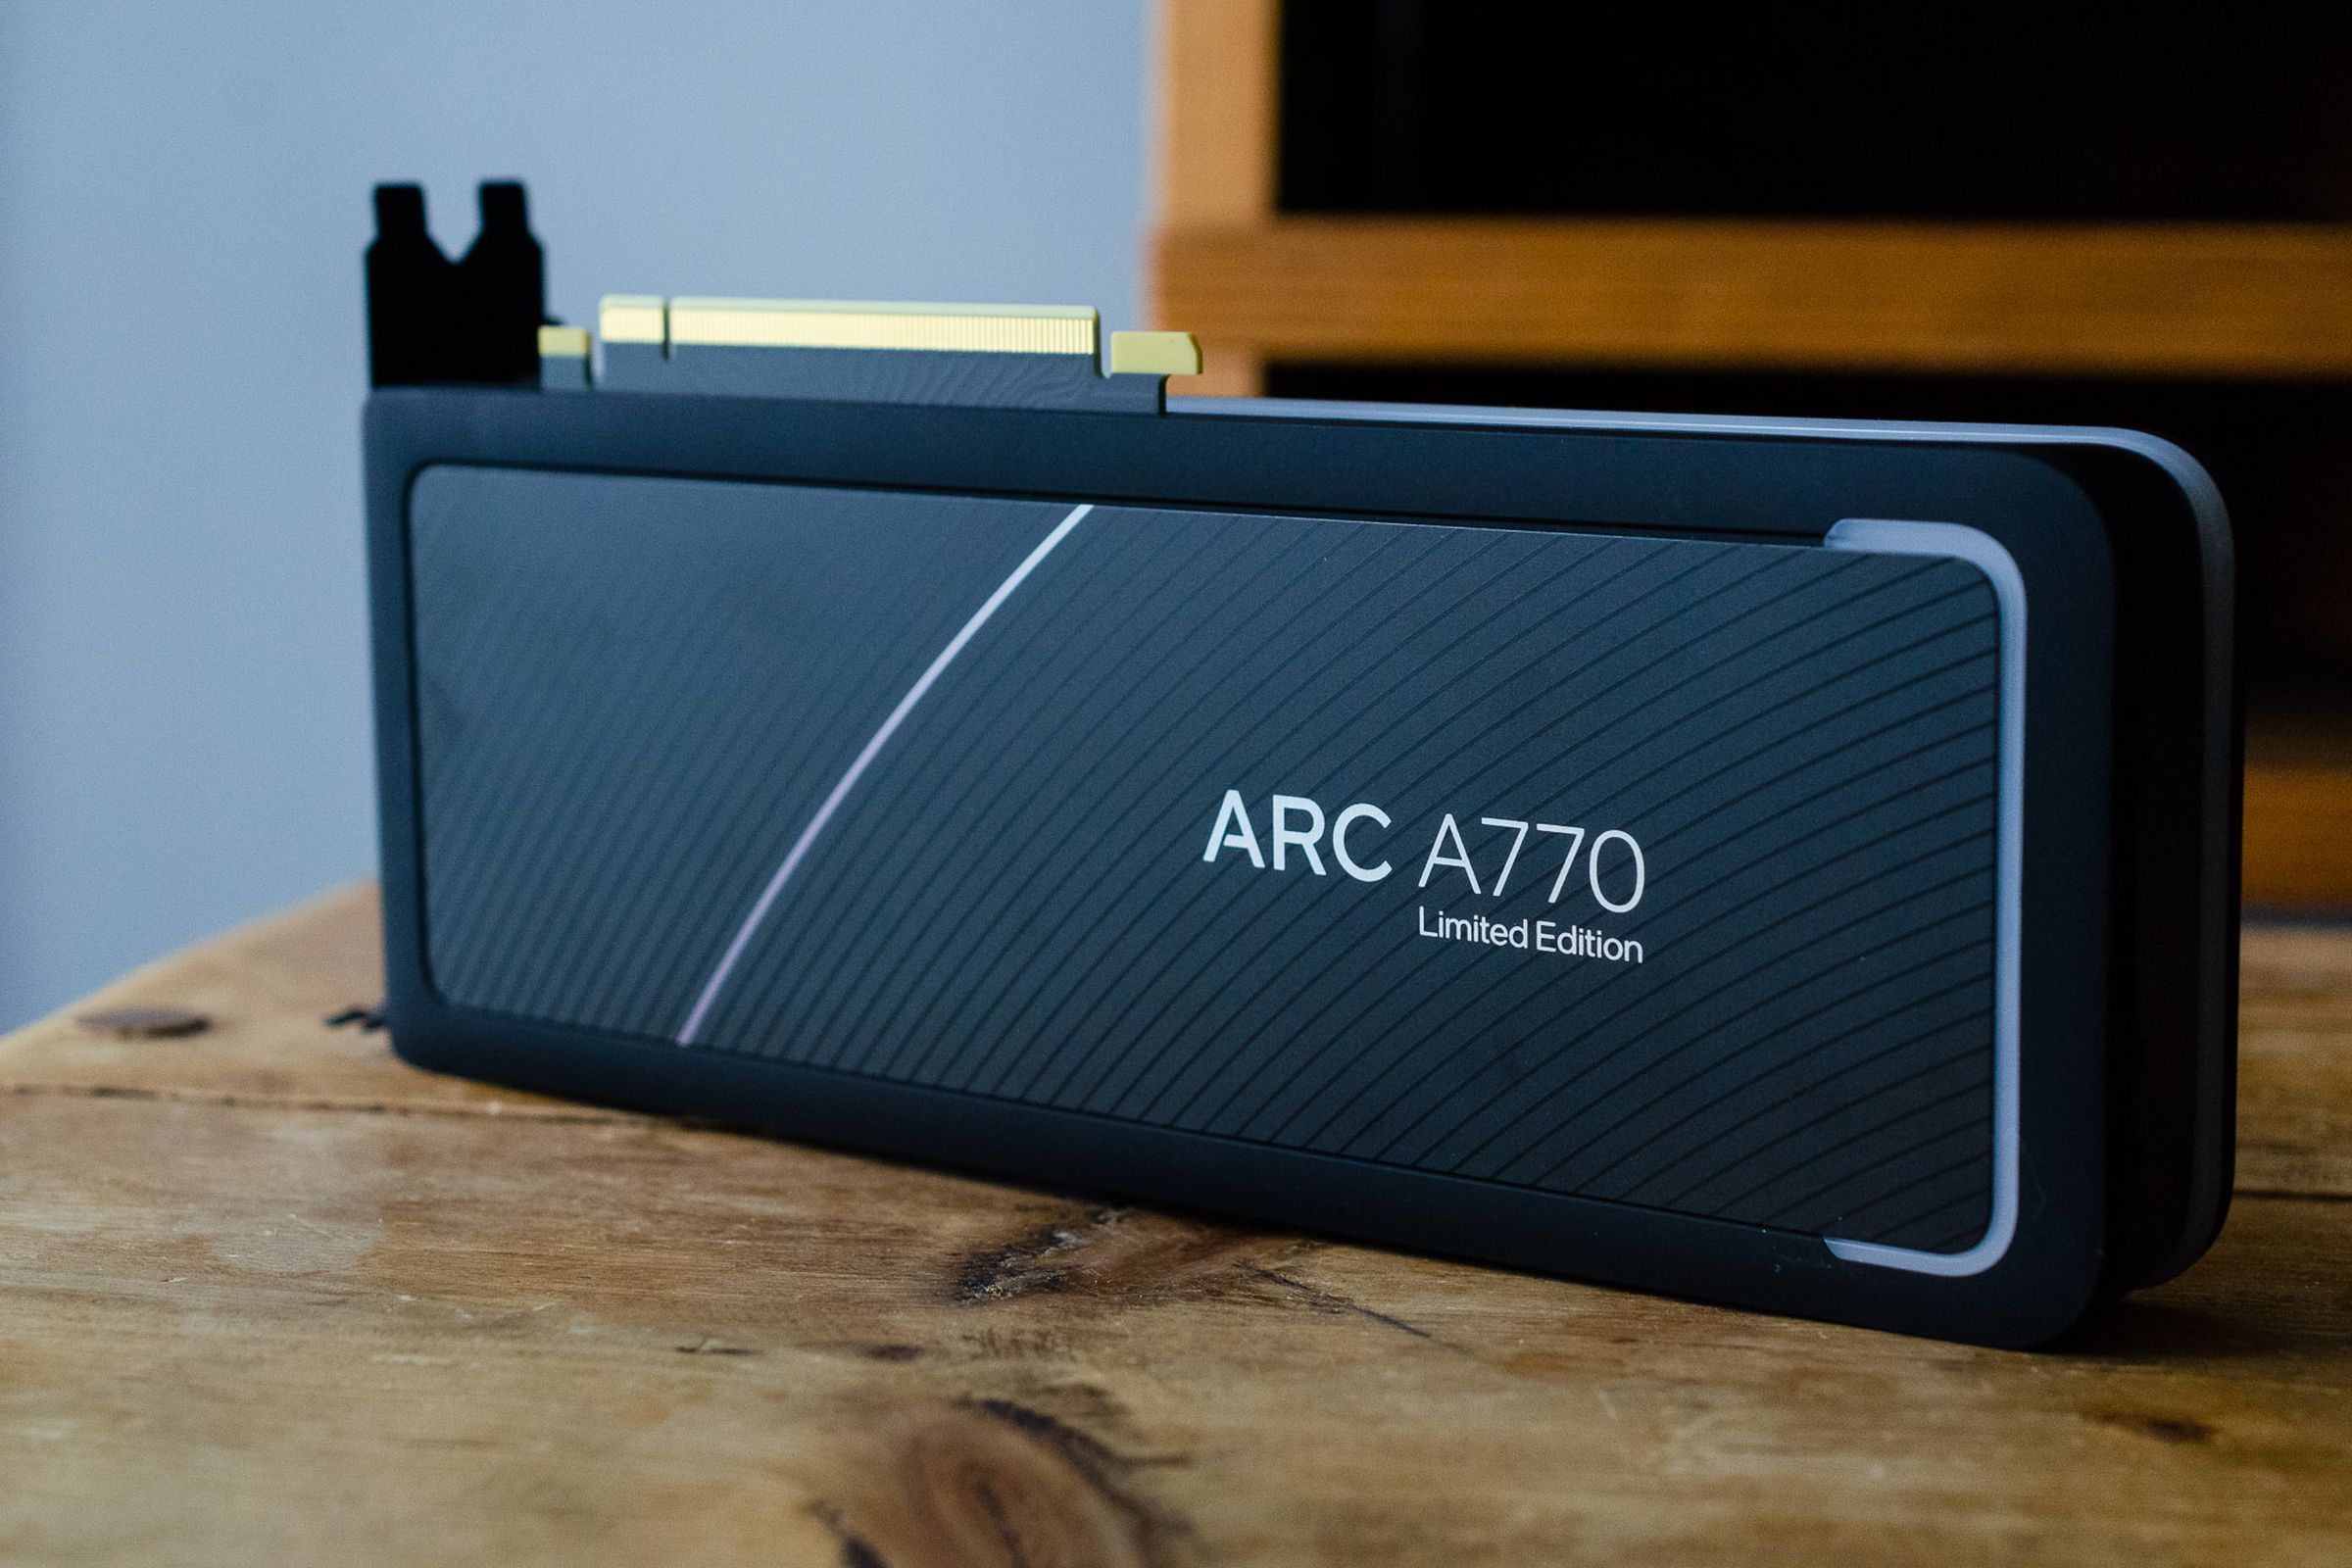 Intel’s new Arc A770 GPU sitting on a wooden table, with its matte black finish and rounded edges